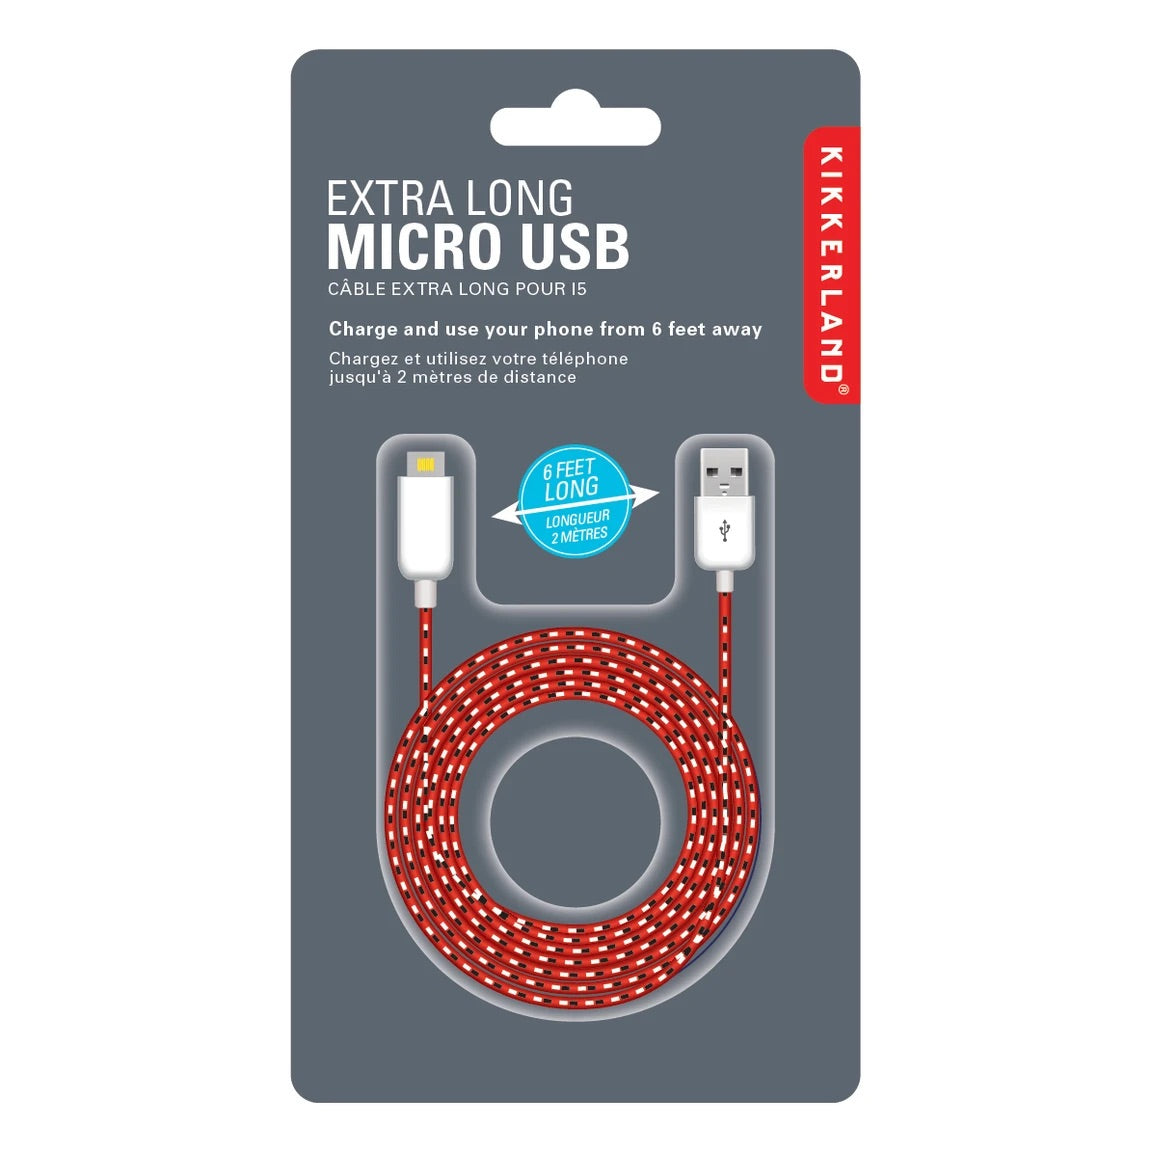 6 Foot Cable Micro USB